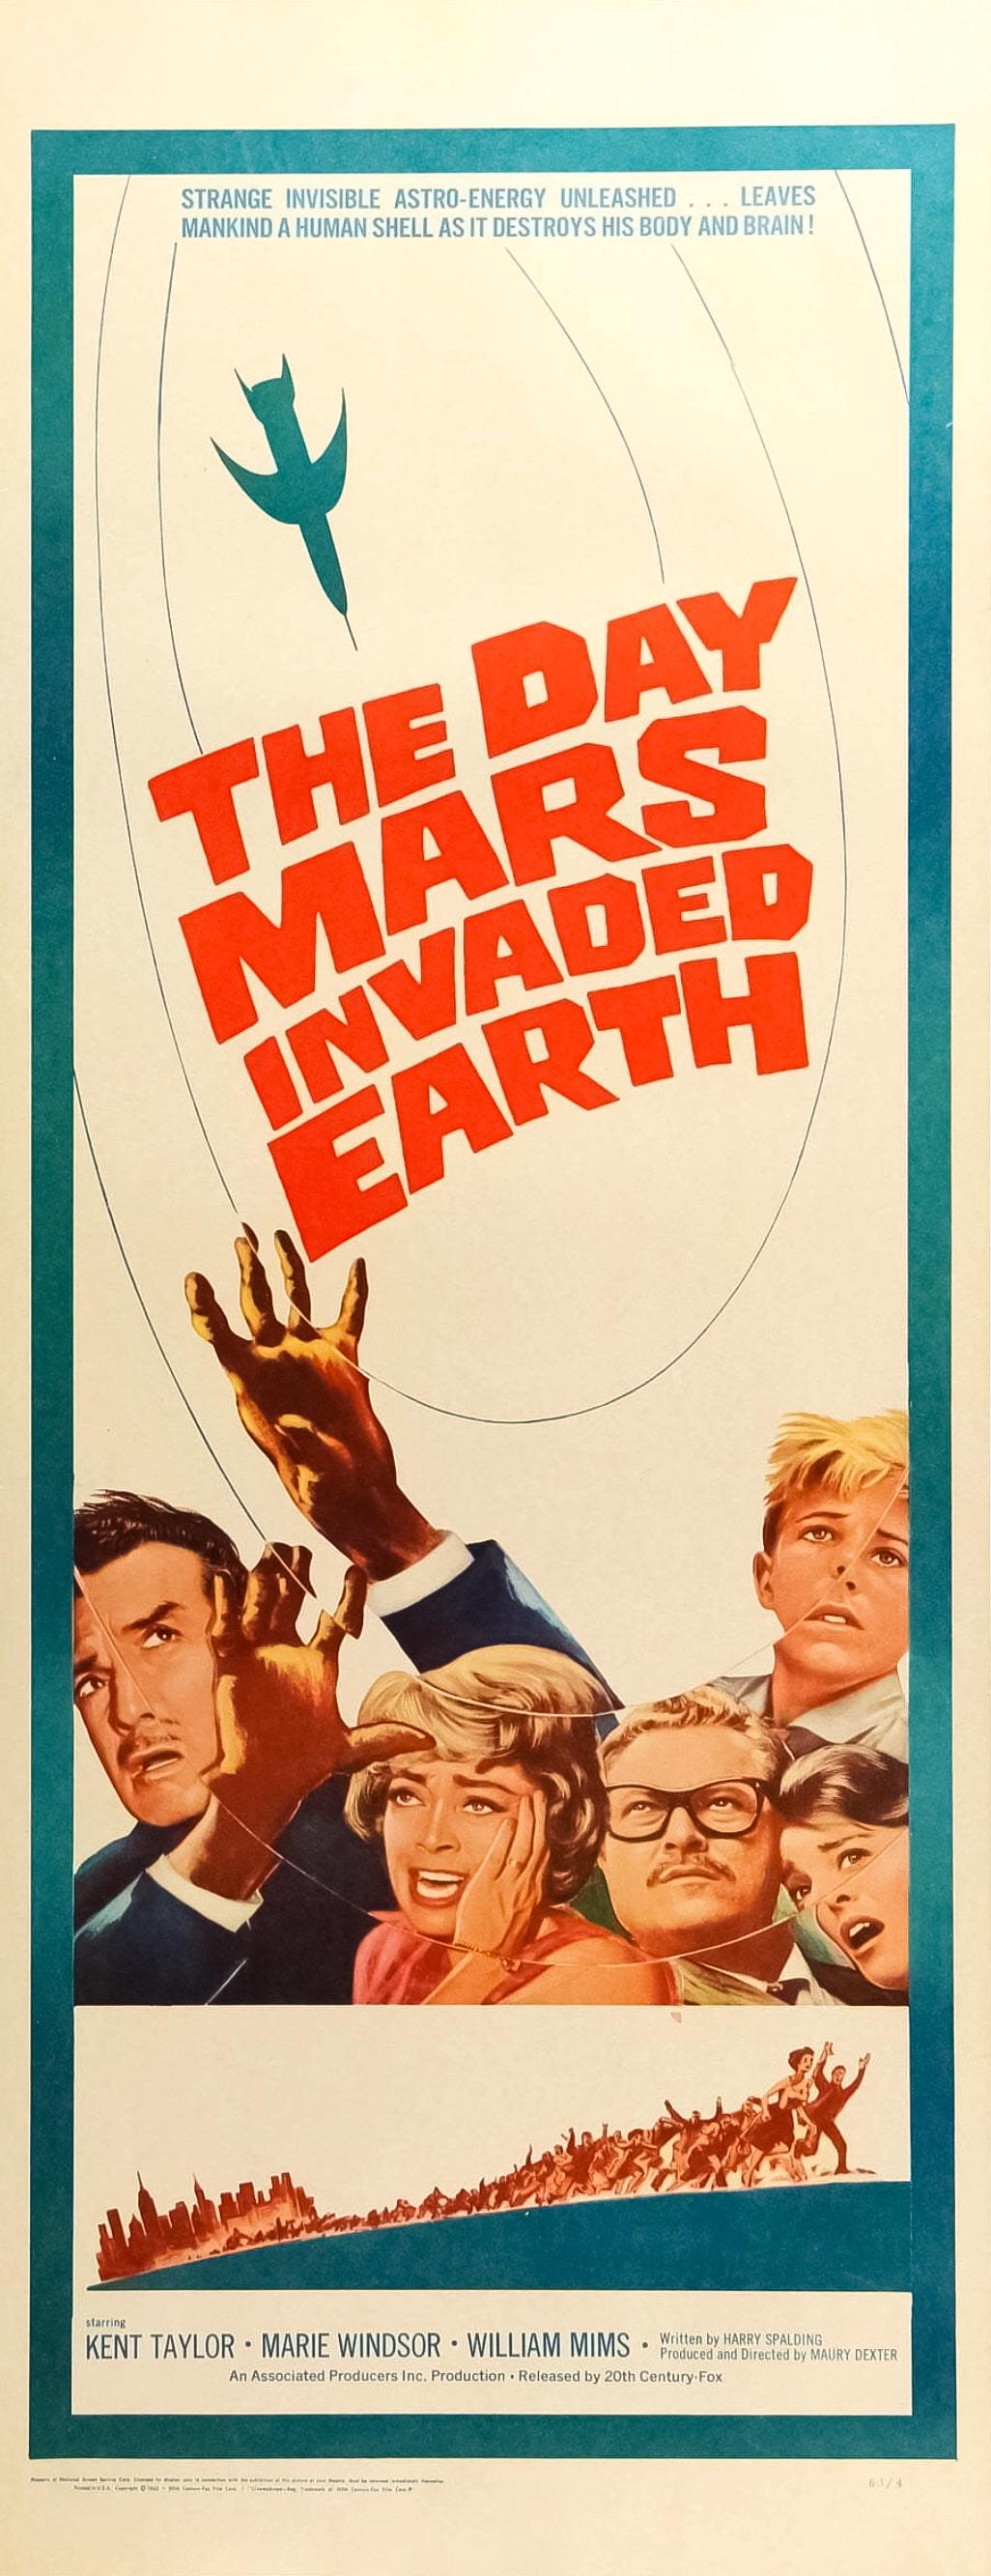 The Day Mars Invaded Earth (1962) Screenshot 4 